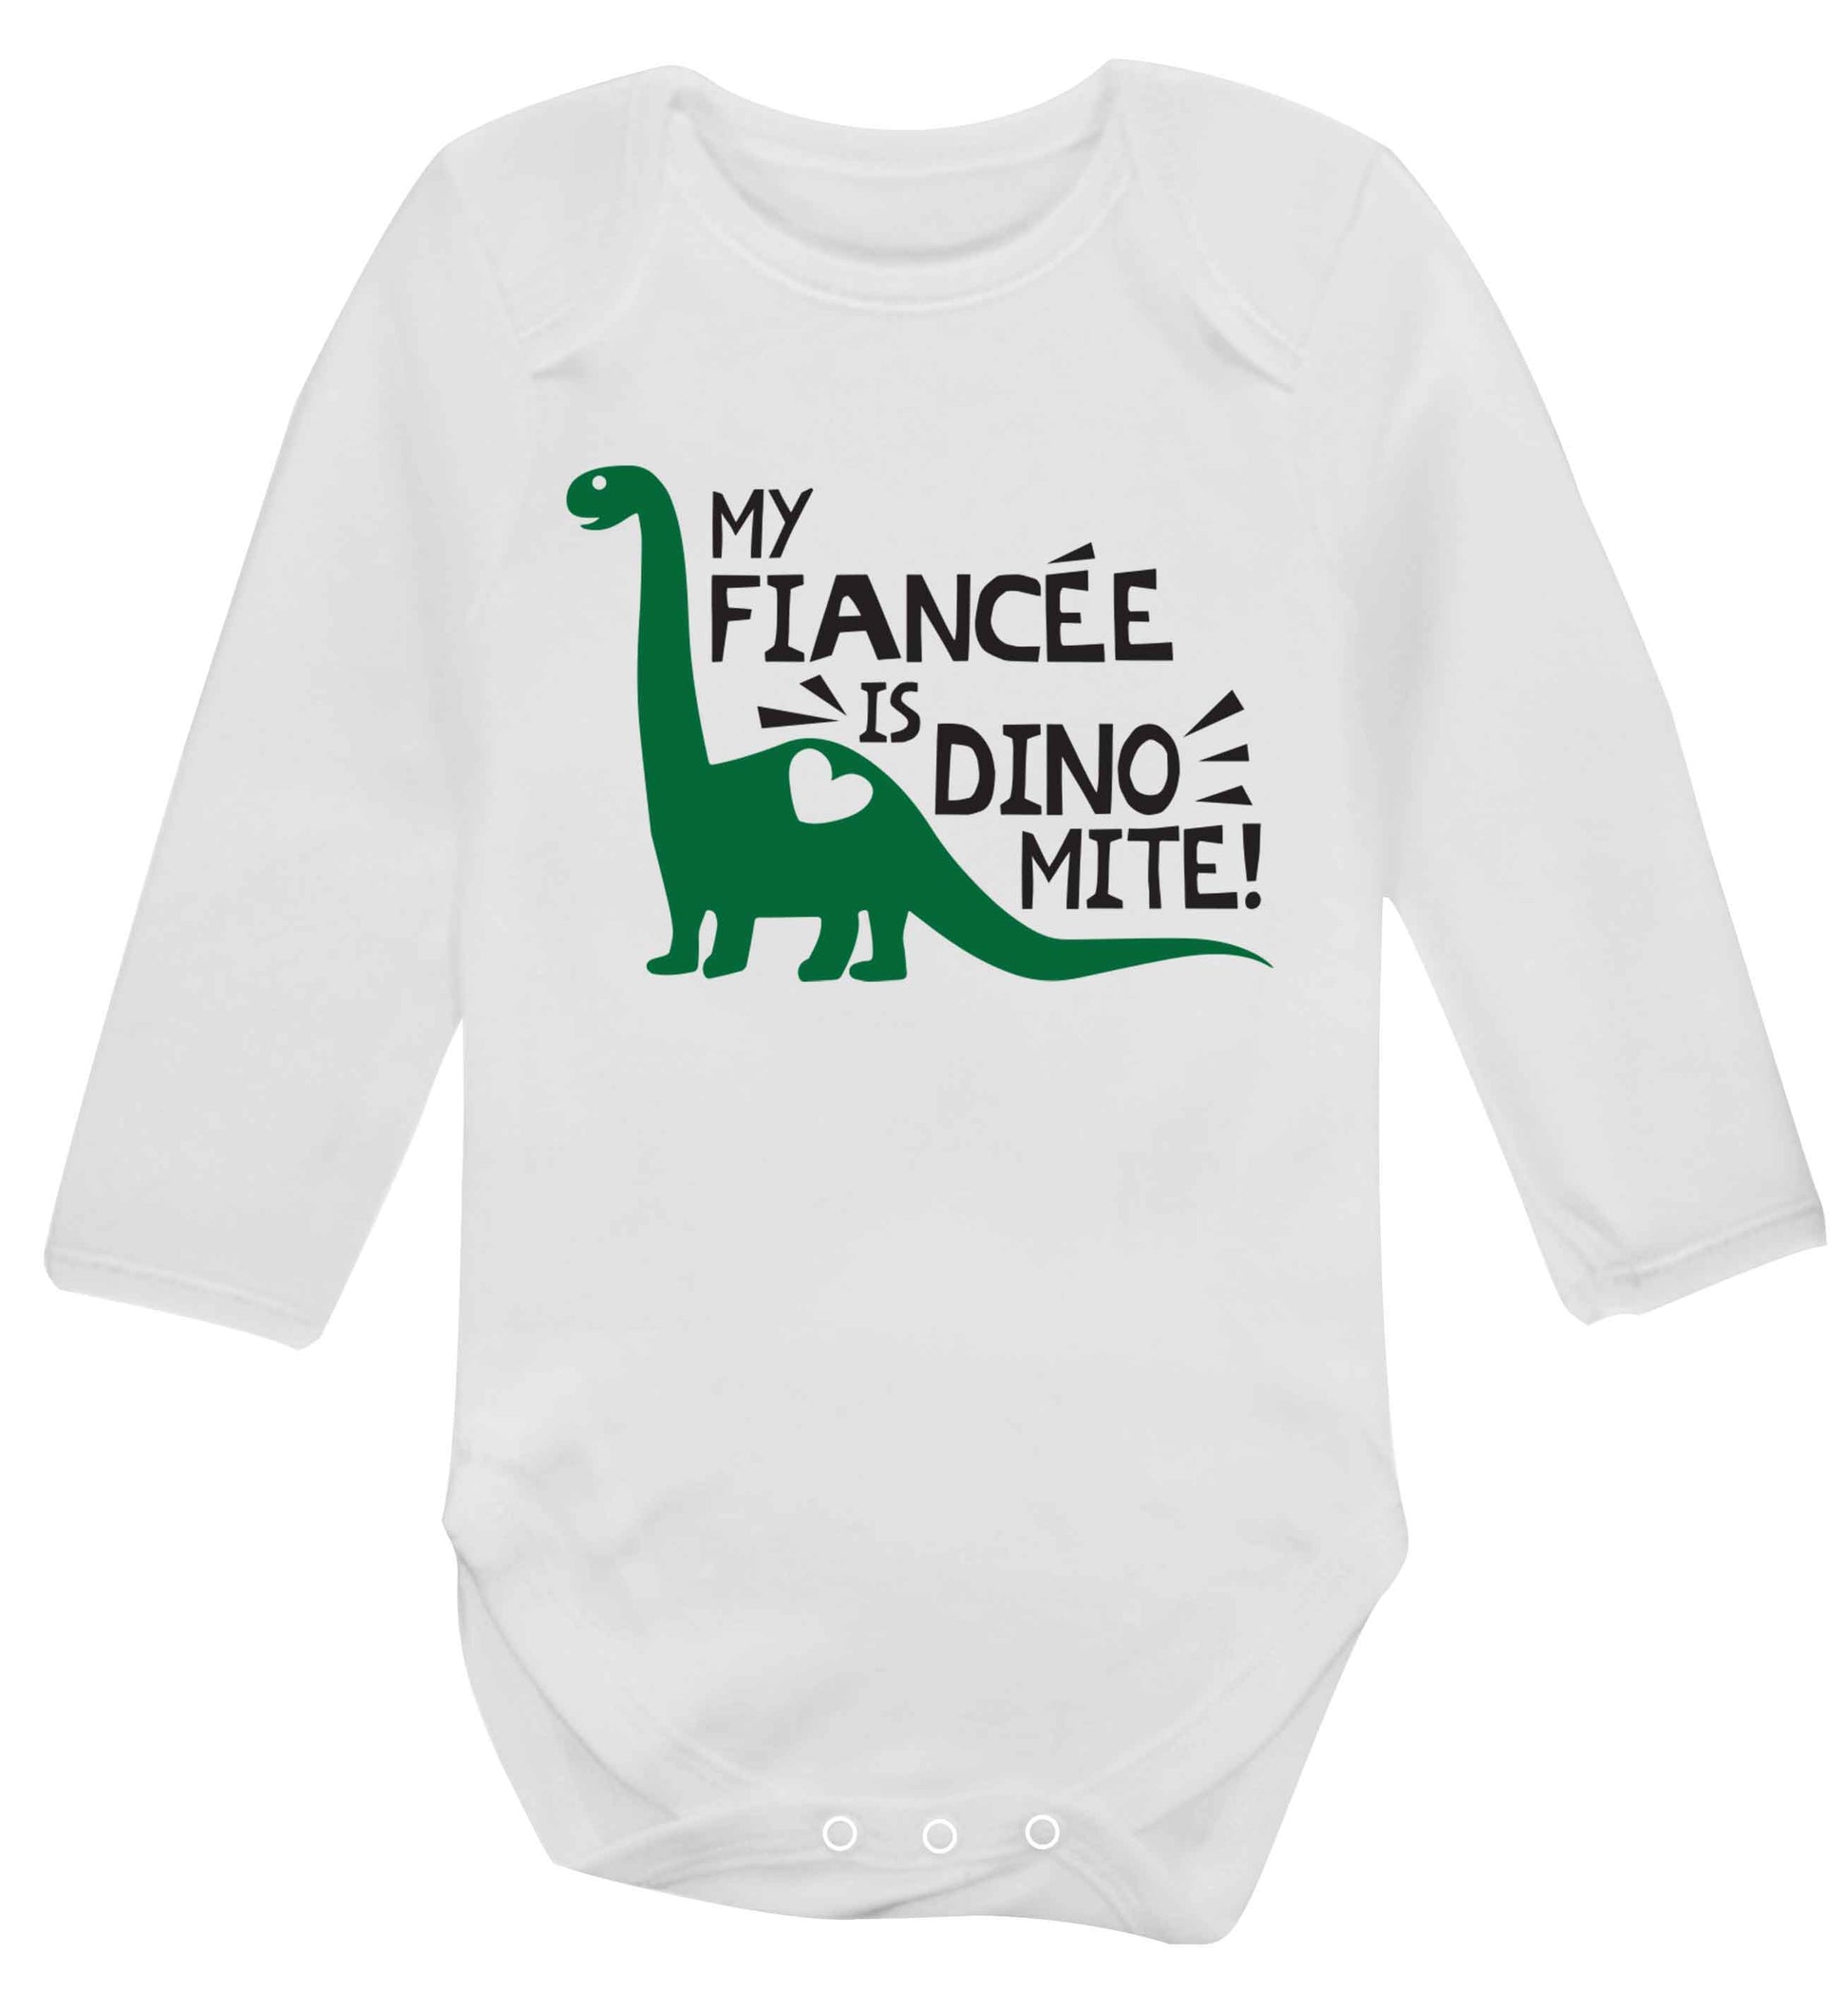 My fiancee is dinomite! Baby Vest long sleeved white 6-12 months